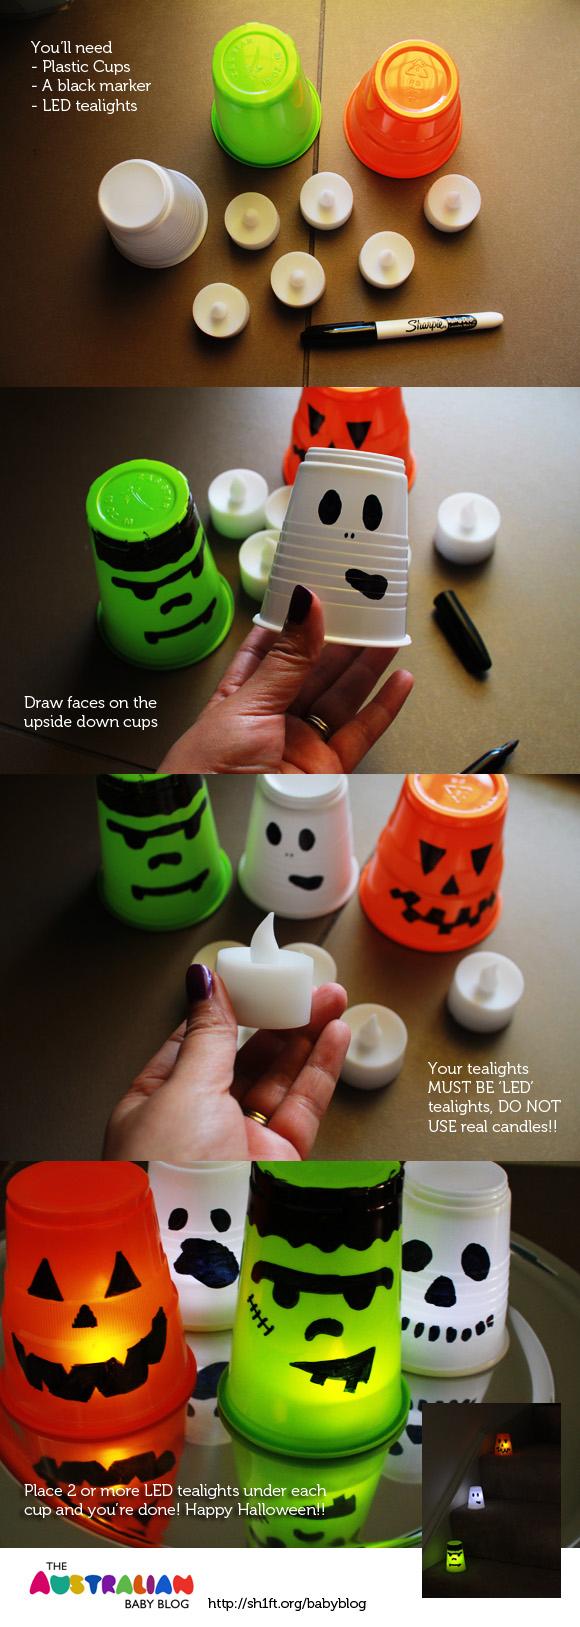 5. Halloween Lanterns created with plastic cups and LED candle-light